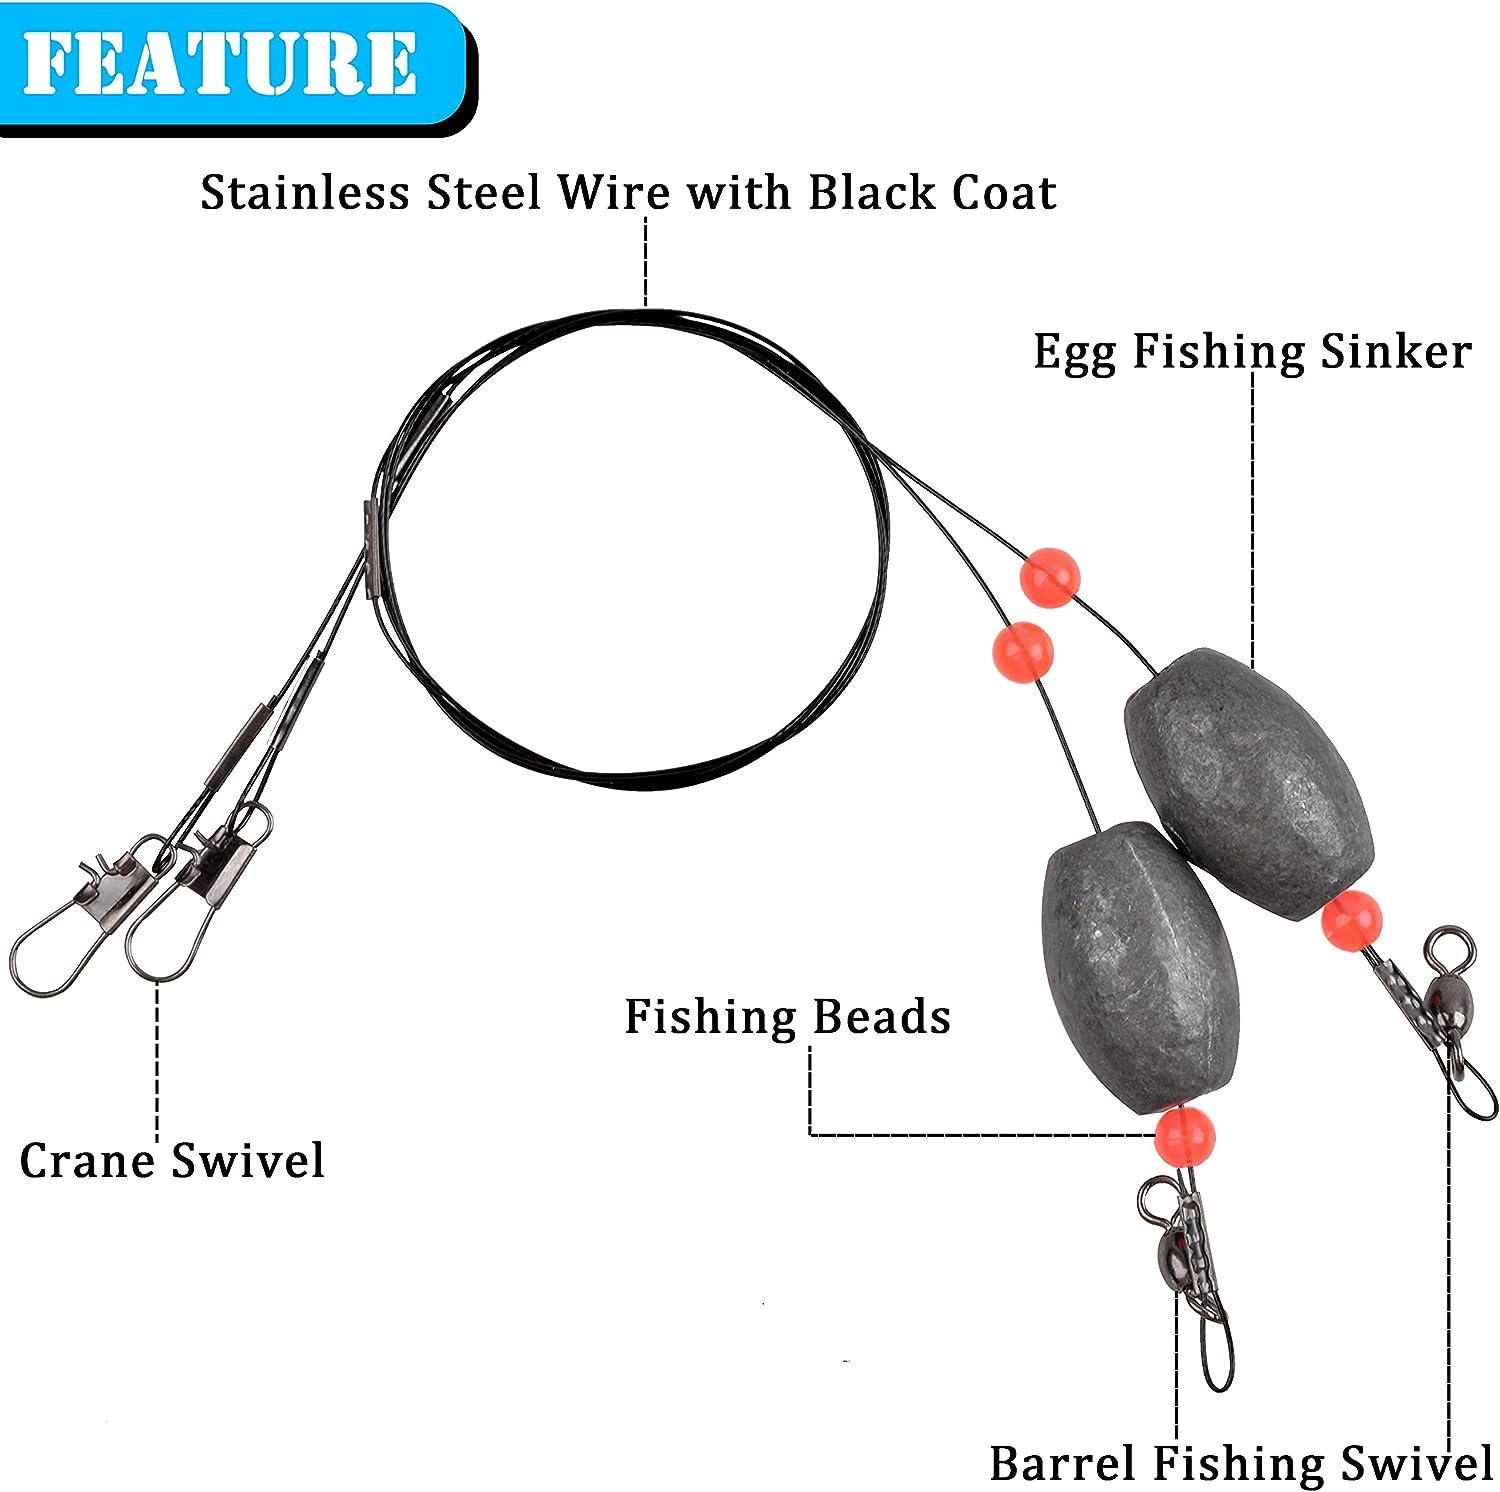 Fishing Weights Egg Weight Rig Carolina Rigs for Fishing Catfish Rig  Fishing Ready Rigs Fishing Leader with Weights Swivels Pre Rigged Carolina  Rigs Jetty Rig Flounder rig Fishing Grouper Rigs 0.75 oz_4pcs